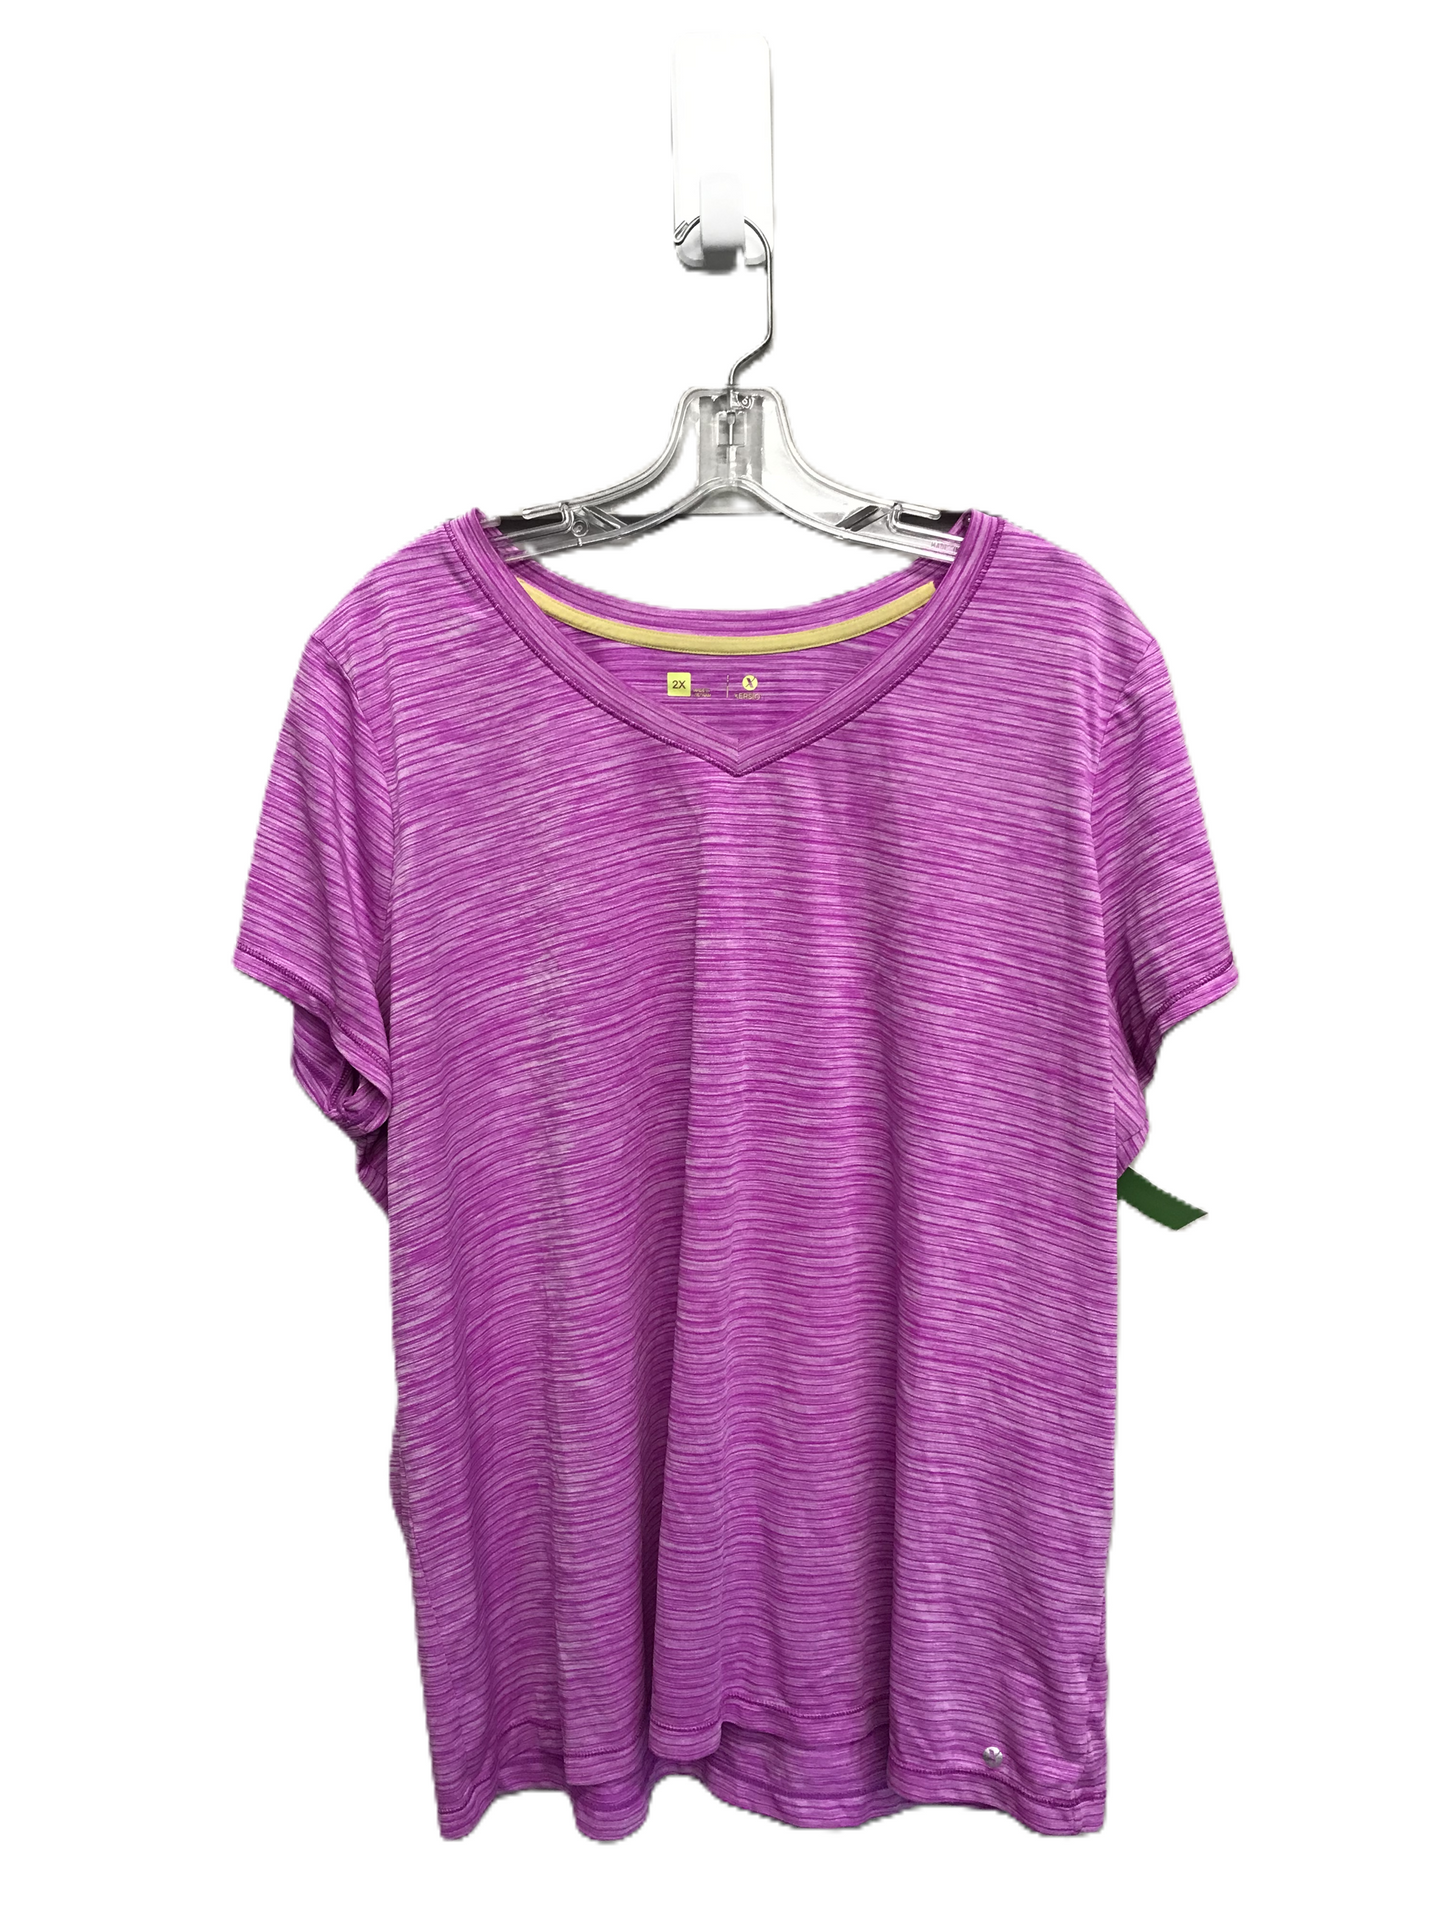 Athletic Top Short Sleeve By Xersion  Size: 2x